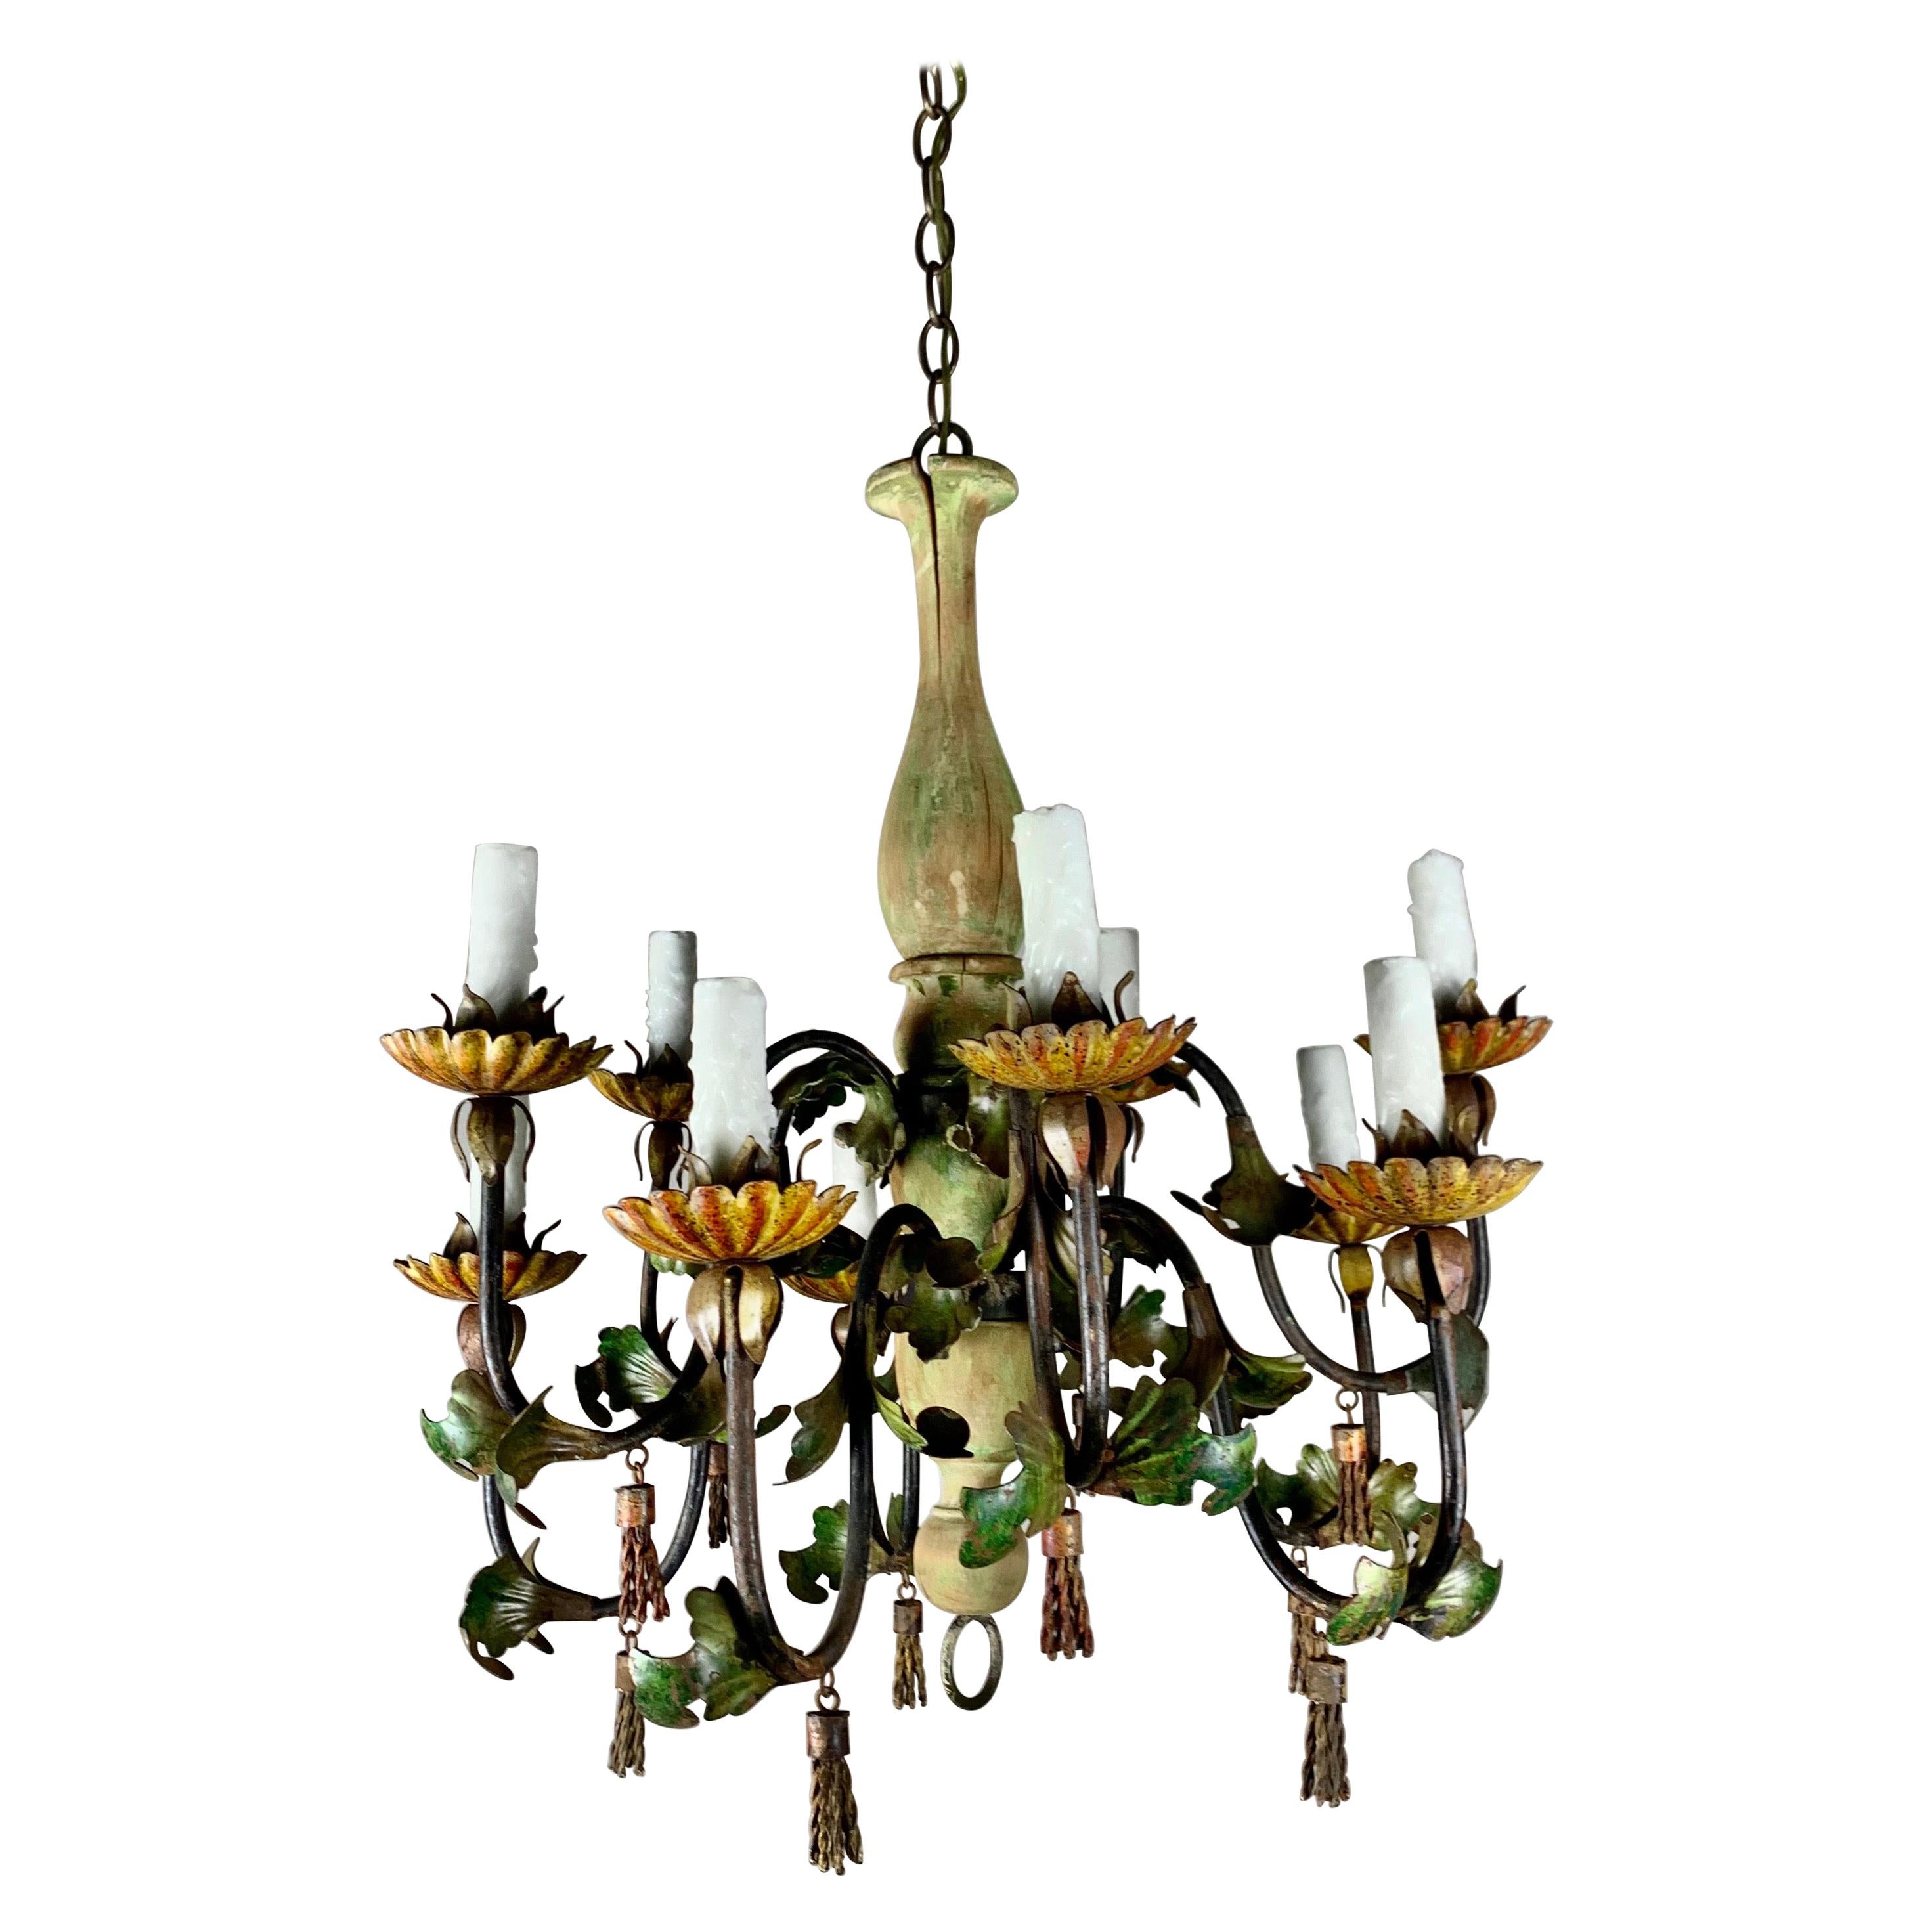 Italian Painted Wood and Iron Chandelier, C. 1940